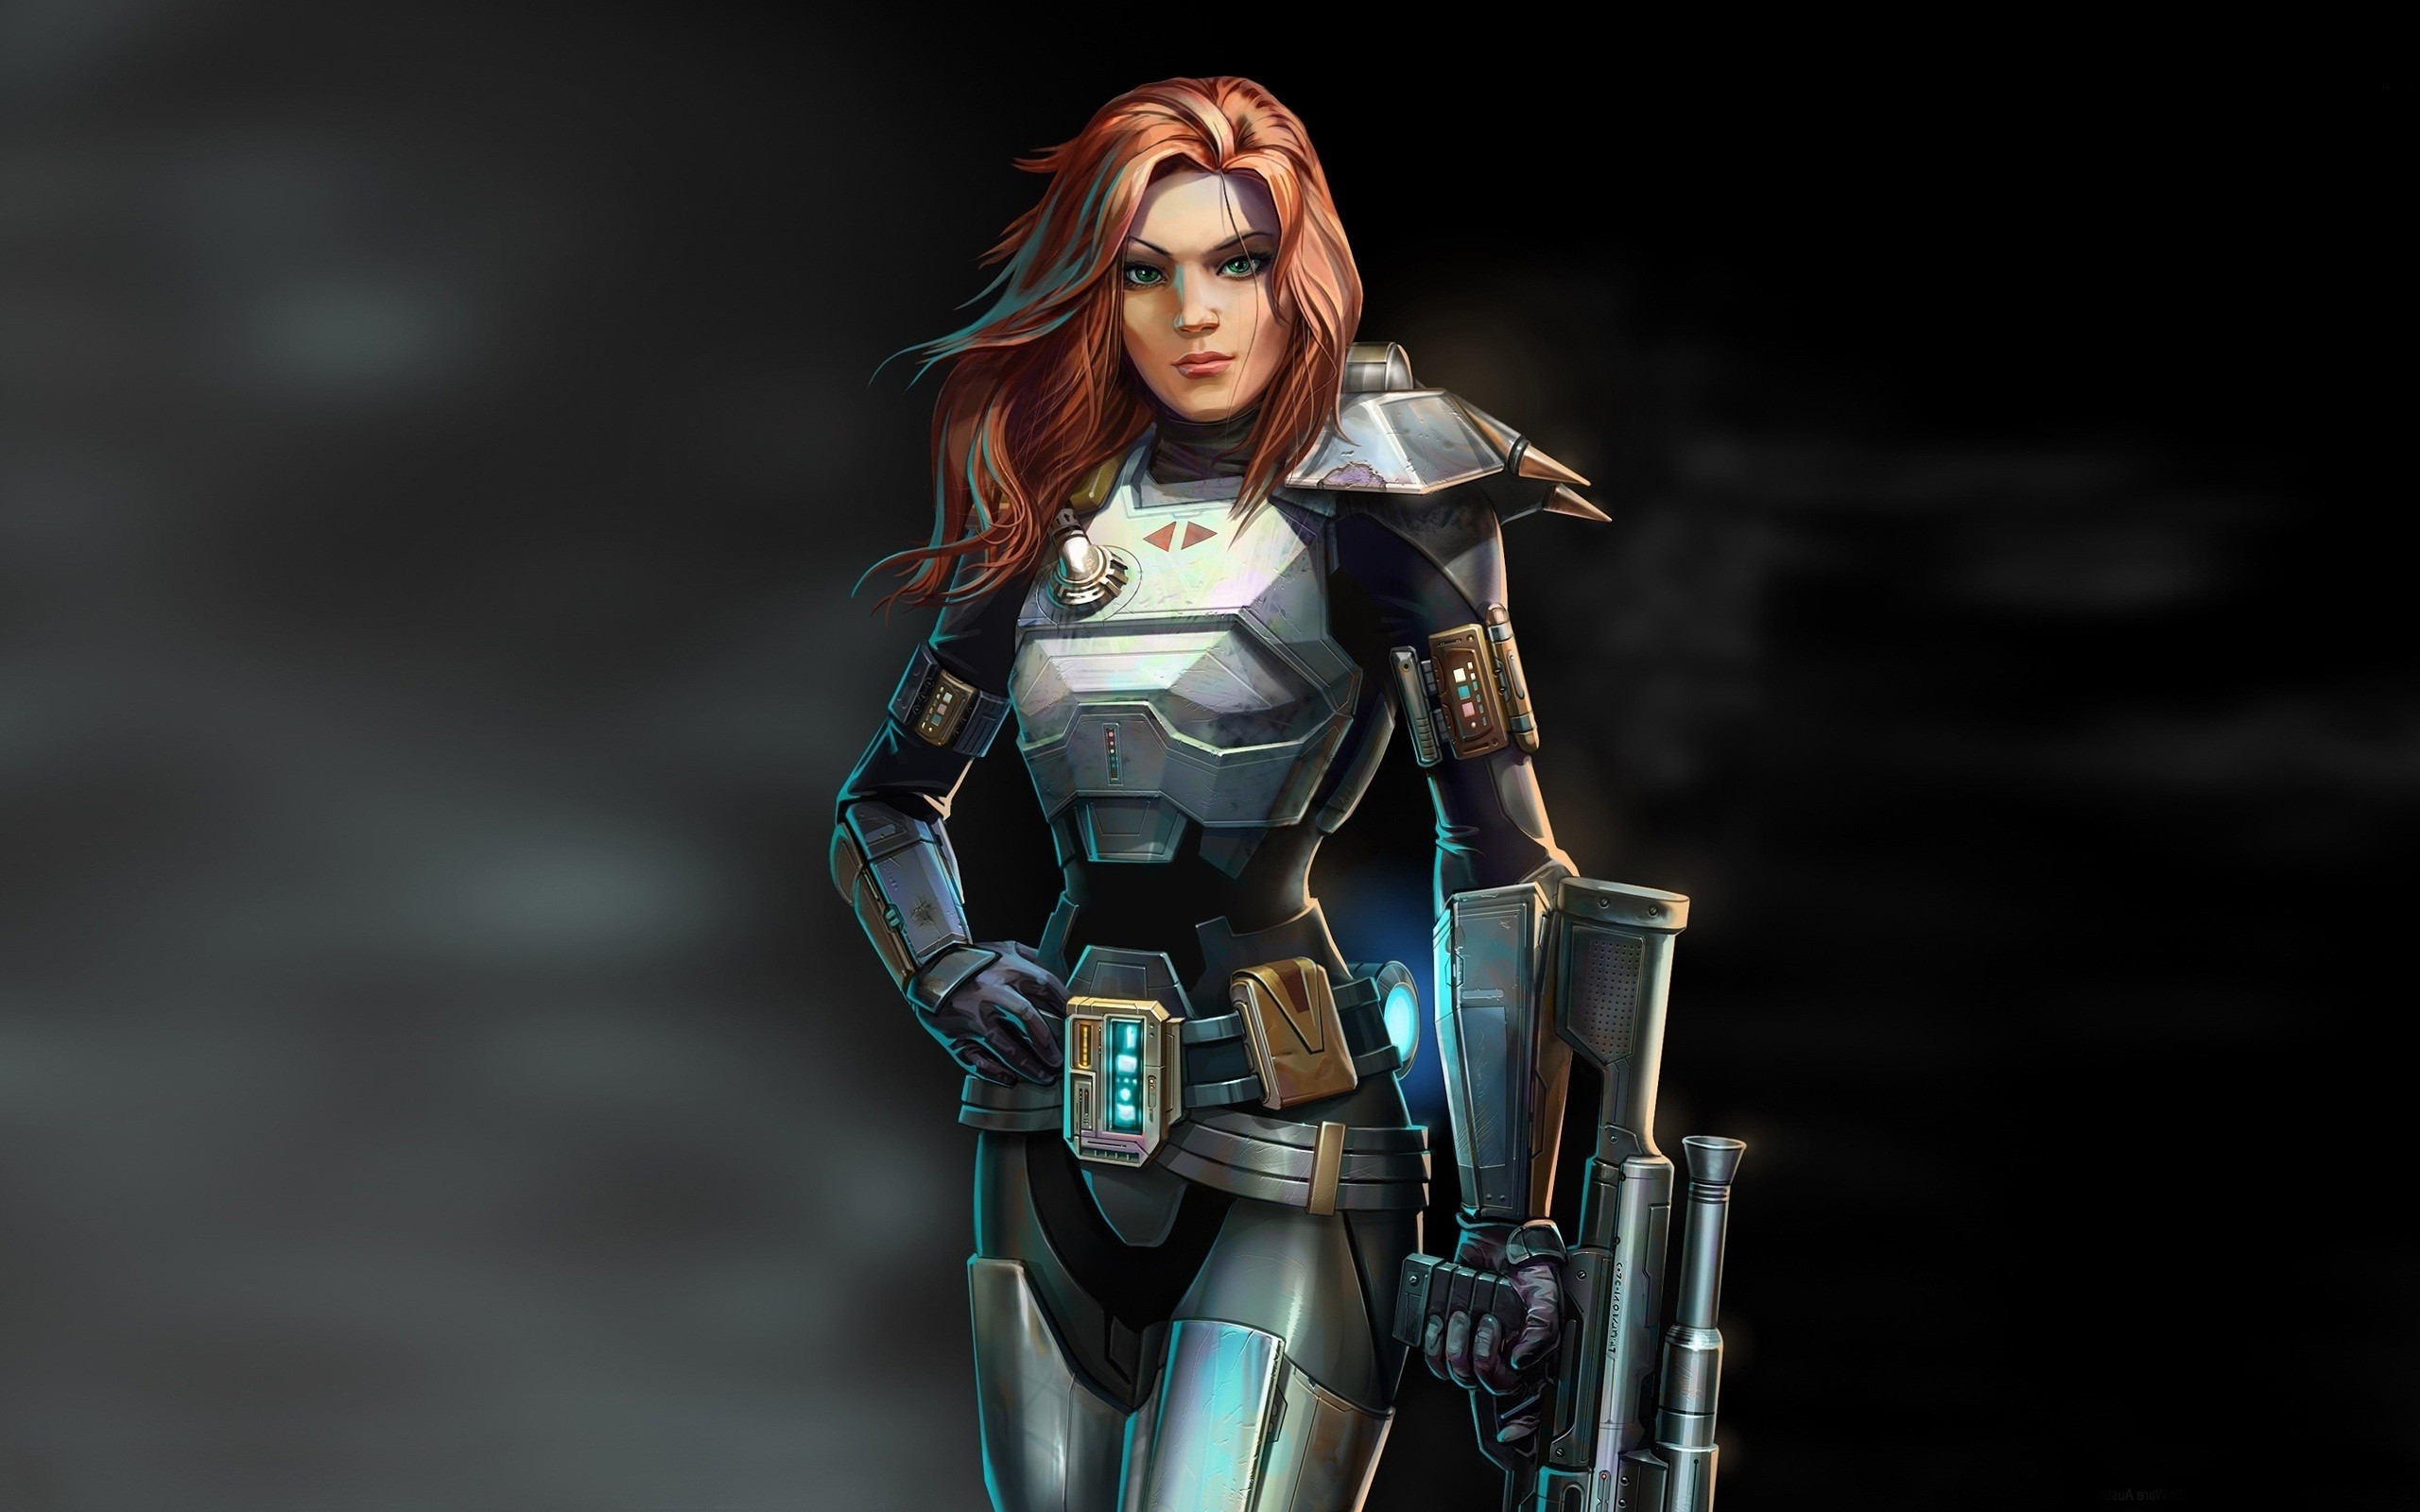 General 2560x1600 Star Wars Star Wars: Knights of the Old Republic video games PC gaming girls with guns science fiction science fiction women video game girls redhead hands on hips standing looking at viewer weapon